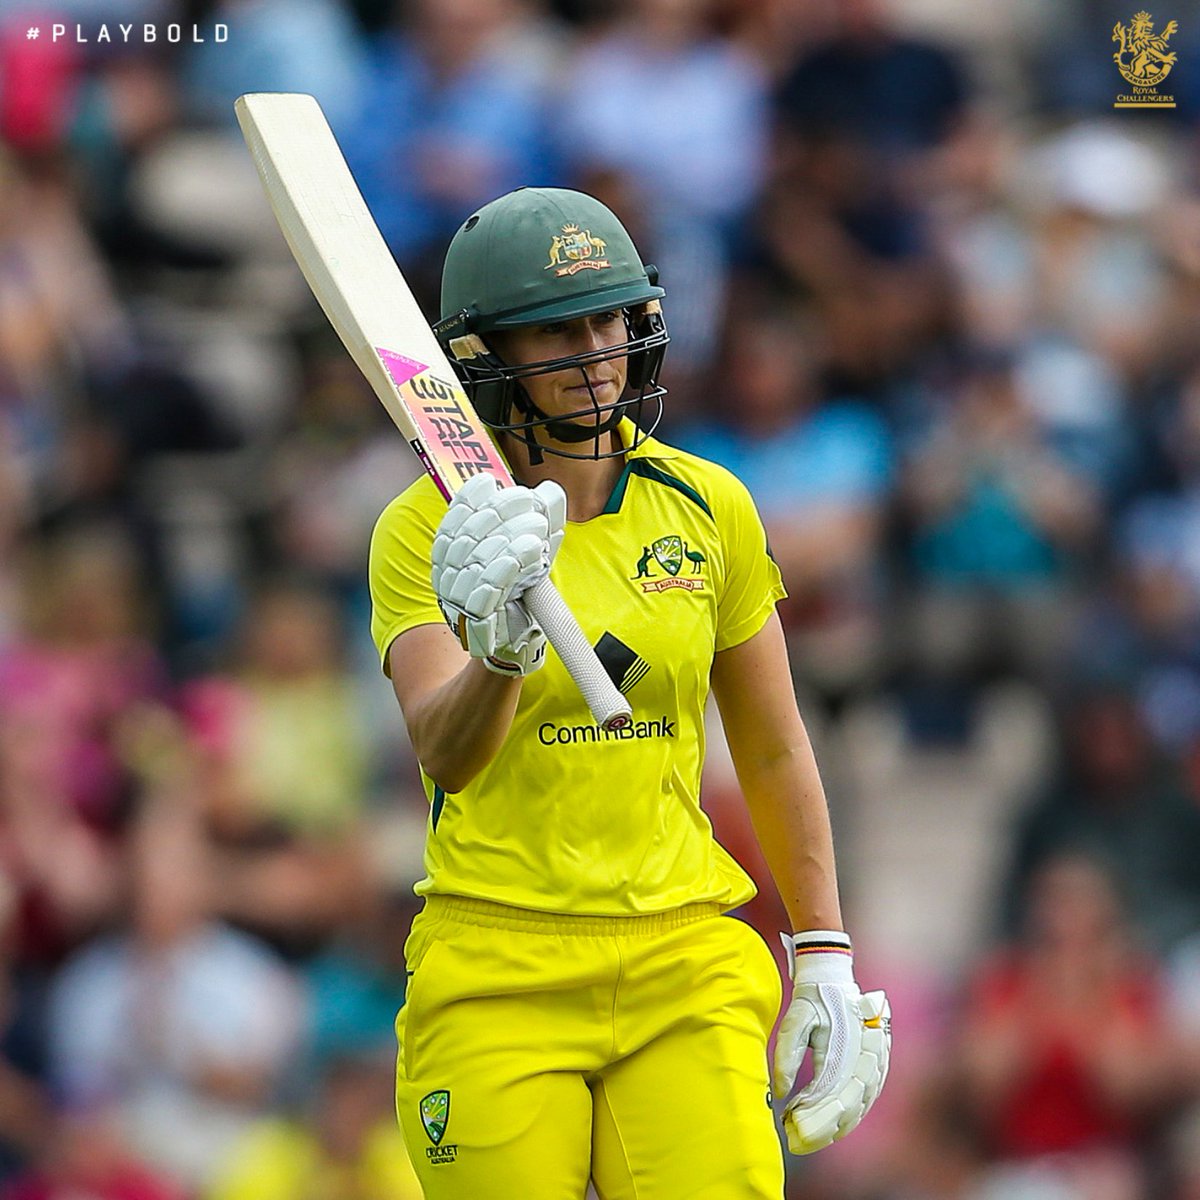 Pez = Class act 👏

A brilliant innings of 9️⃣1️⃣ by @EllysePerry set up a thrilling victory over 🏴󠁧󠁢󠁥󠁮󠁧󠁿 in the 2nd ODI resulting in a successful retention of the Ashes for Australia! 🏆🔥

#PlayBold #WomensAshes #Ashes2023